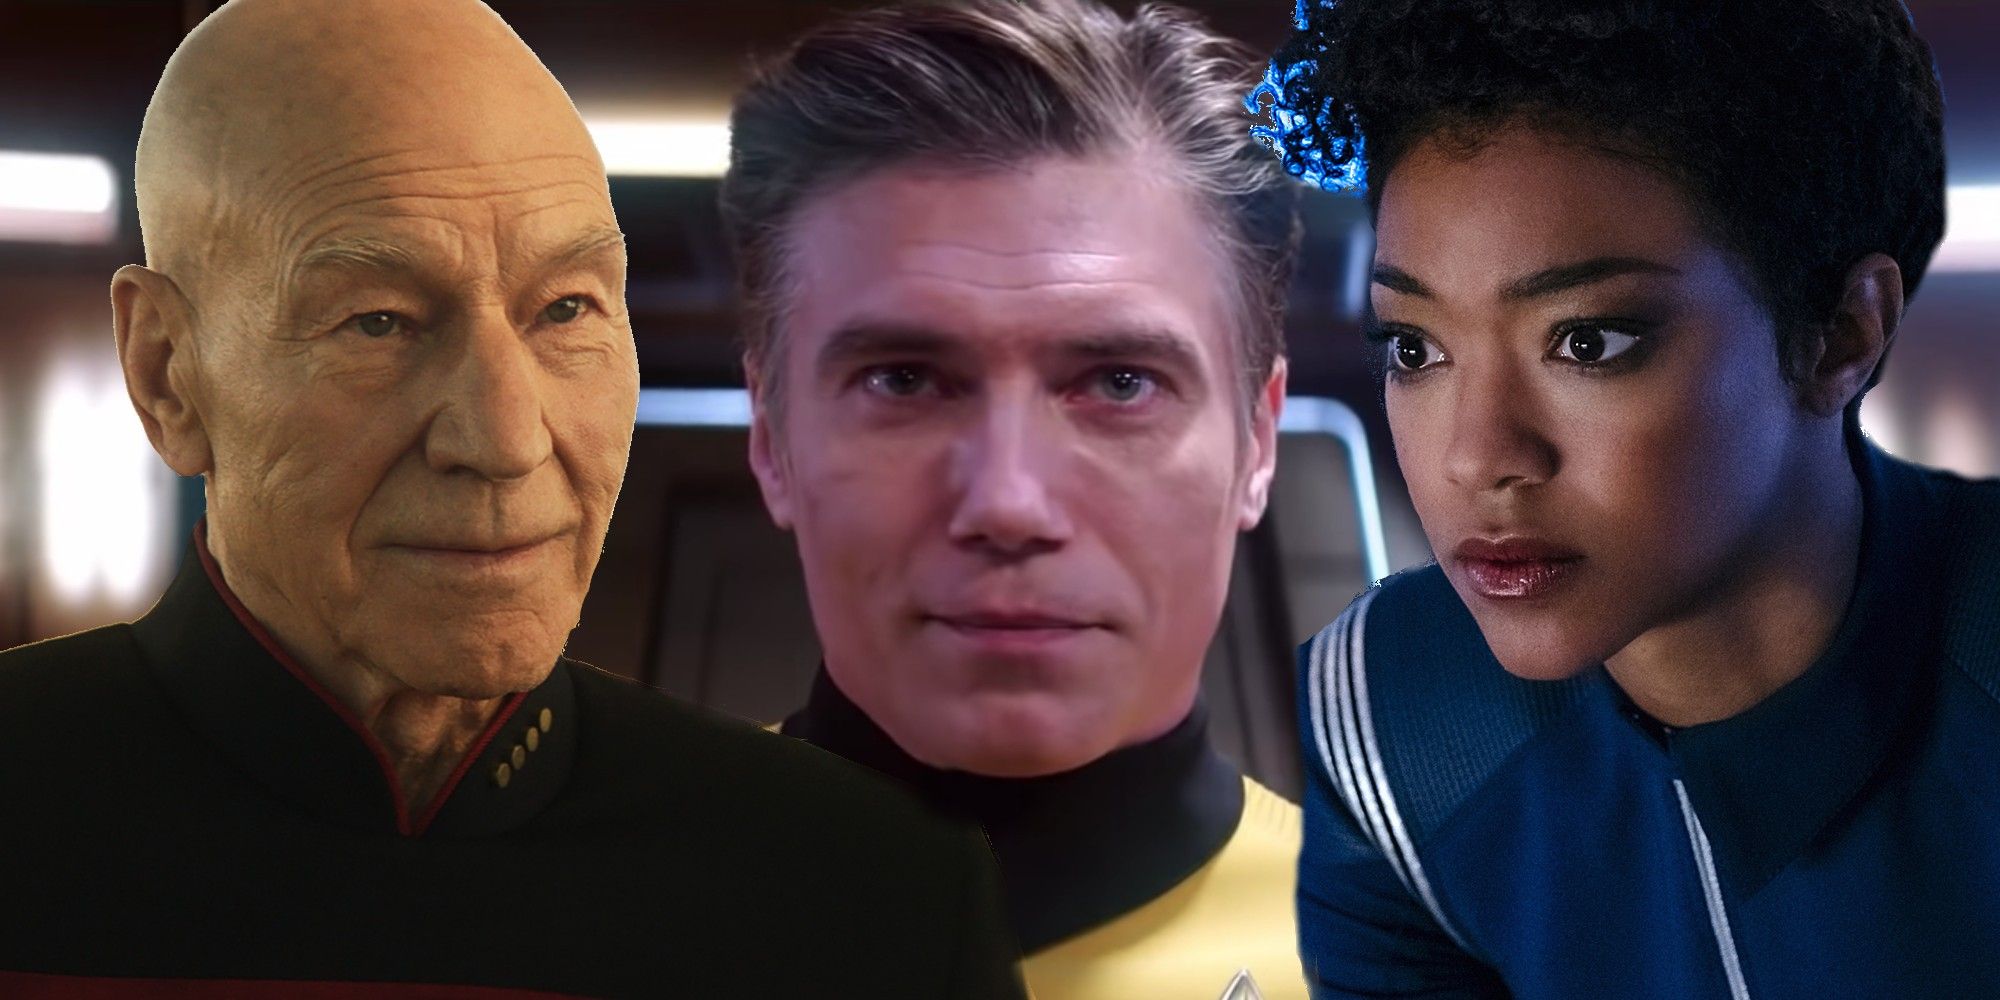 Patrick Stewart as Jean-Luc Picard in Star Trek, Anson Mount as Christopher Pike and Sonequa Martin Green as Michael Burnham in Discovery